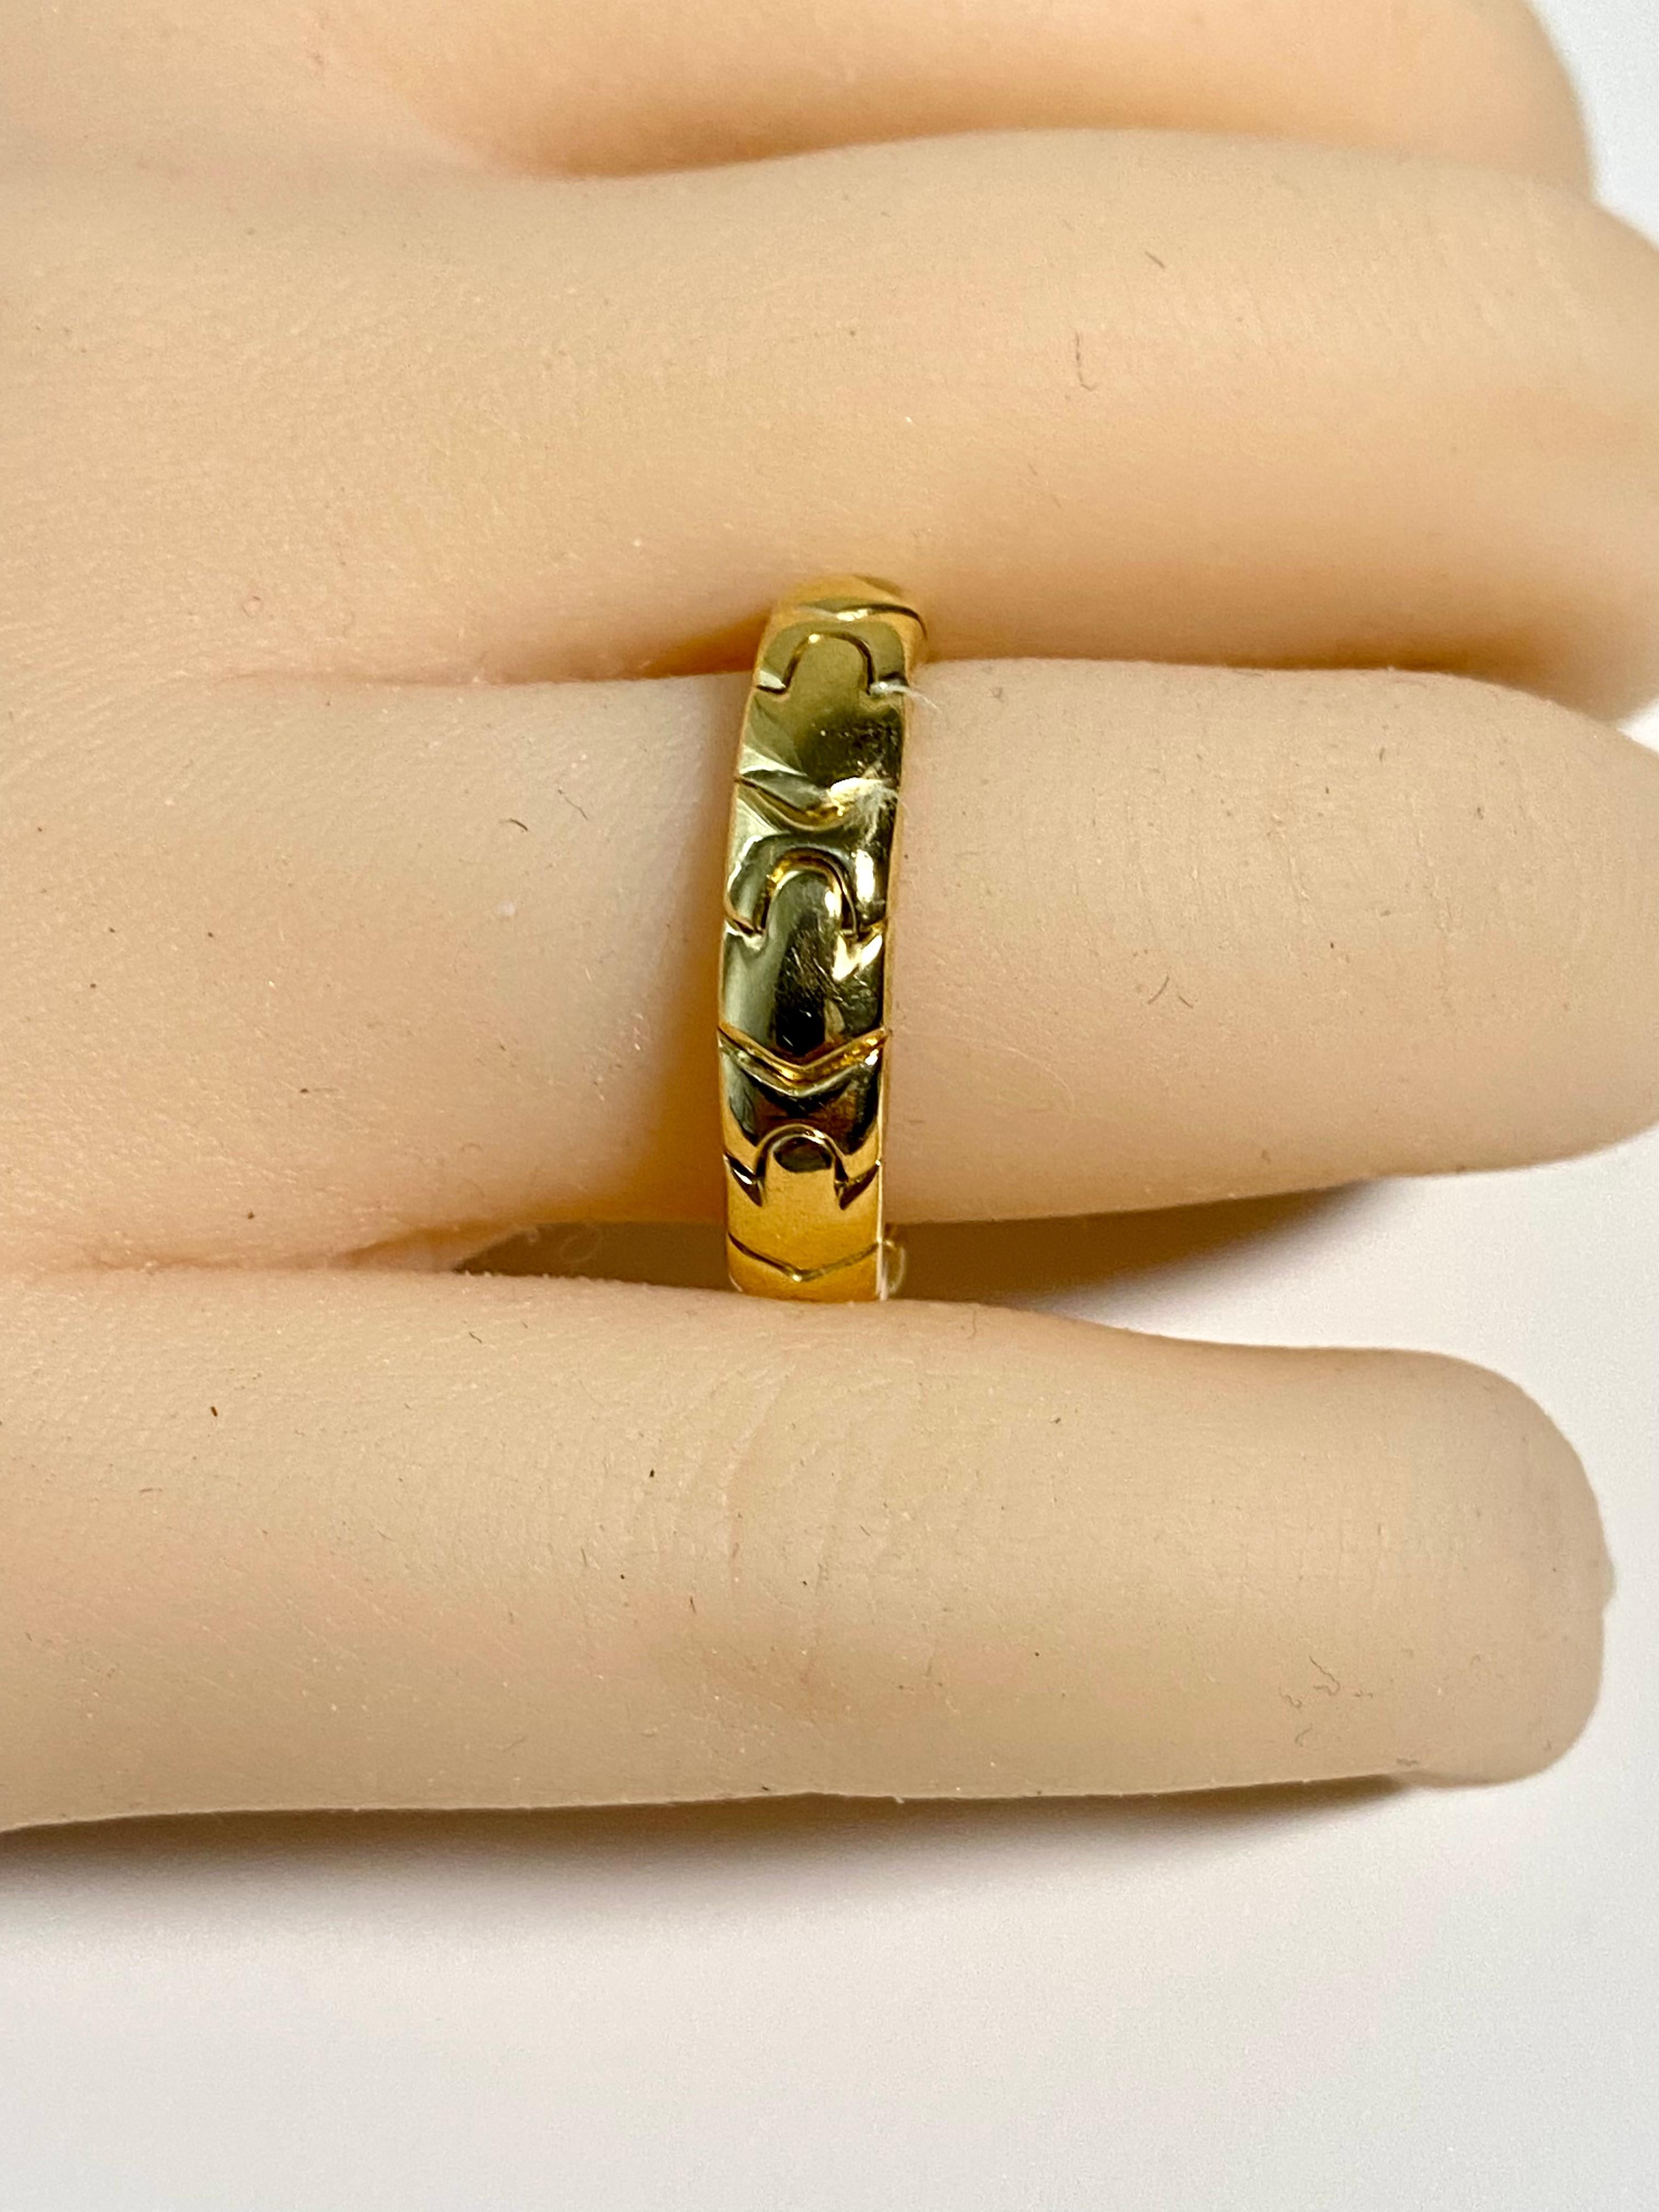 Vintage Bvlgari, from the Passo Doppio Collection, 18 karat yellow Gold band
Ring is 5.2 mm wide, 0.22 inch
Ring finger size 9
Ring marked Bvlgari, 750, made in Italy, Italian mark.
Open cuff design 
Ring weighing 9.5 grams
The Bvlgari Passo Doppio